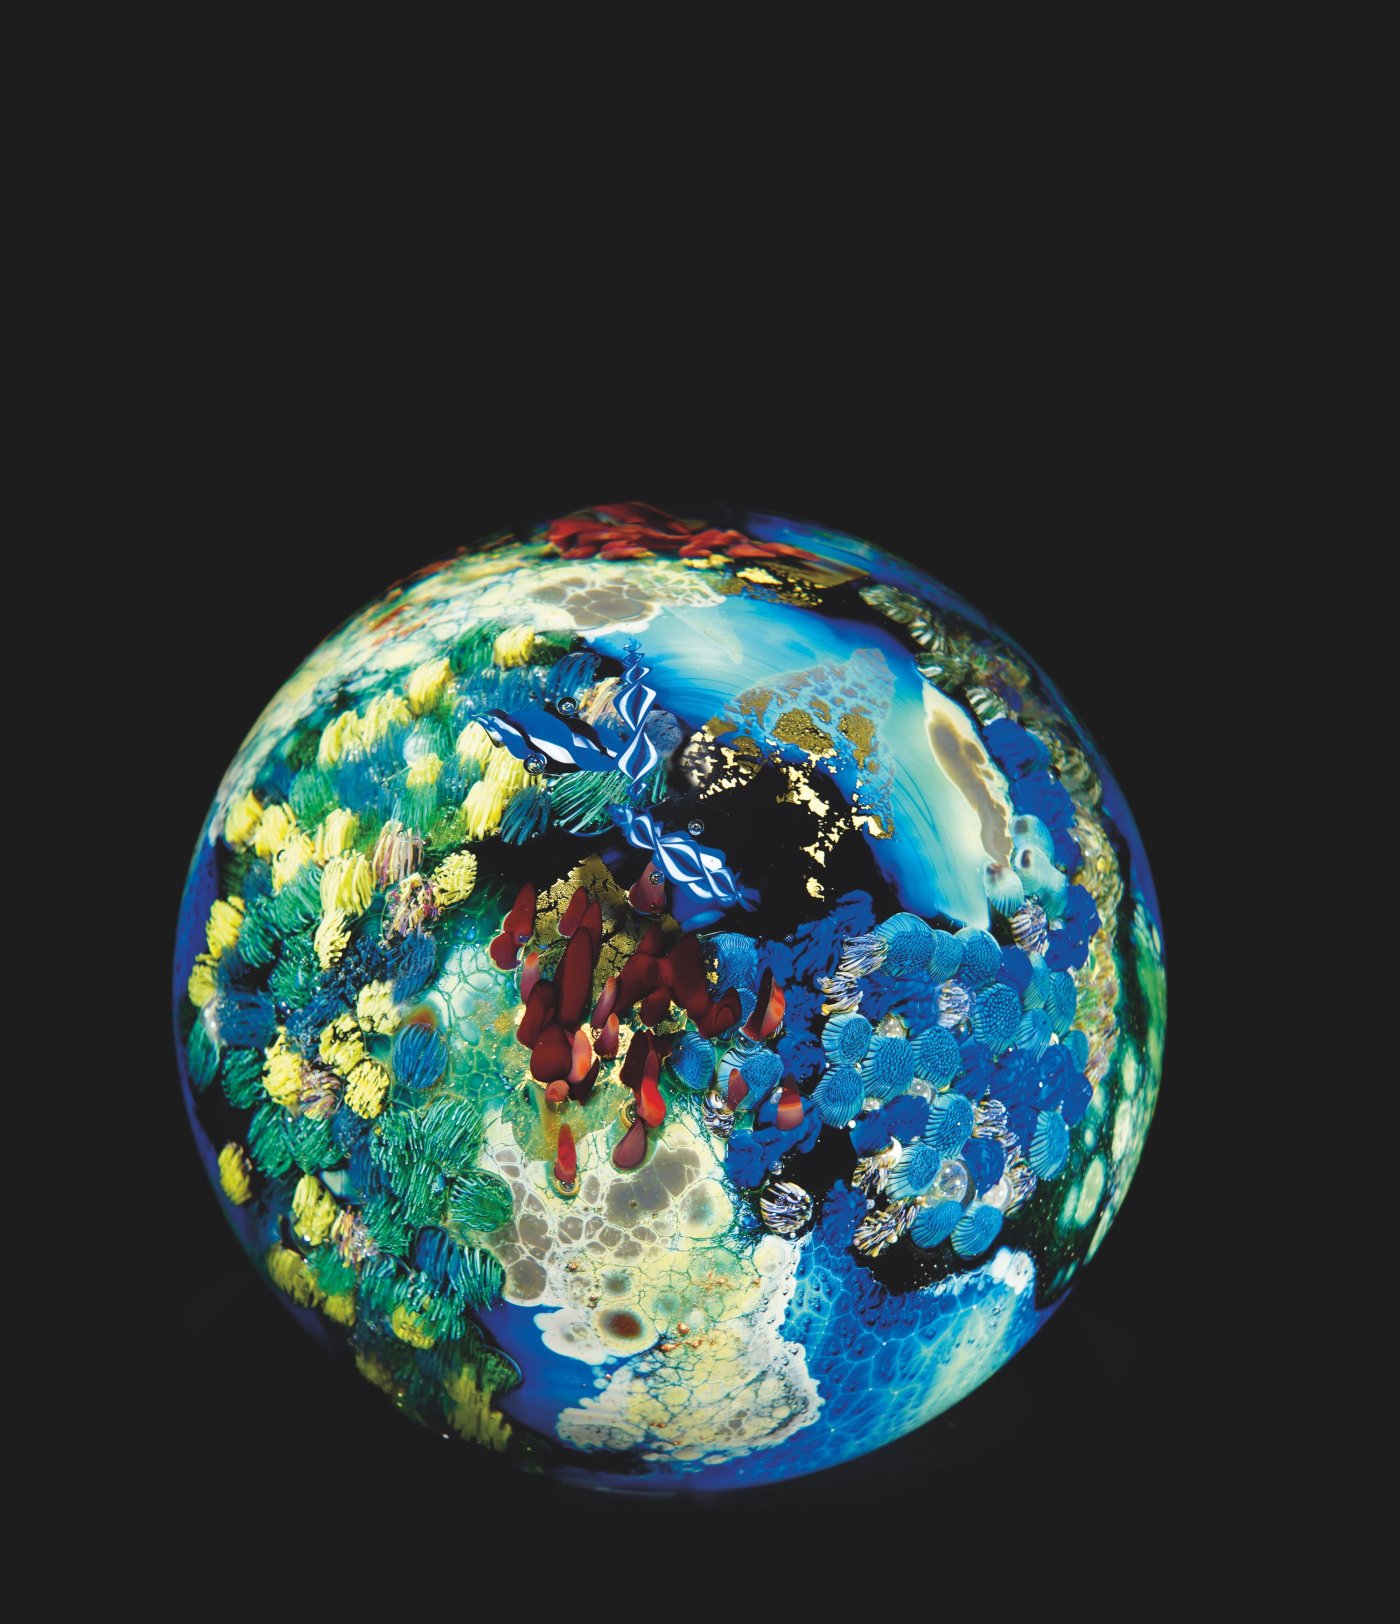 Glass sphere with blues, greens, yellows, reds and gold shapes creating a planet-like image, 5.25 in. diameter